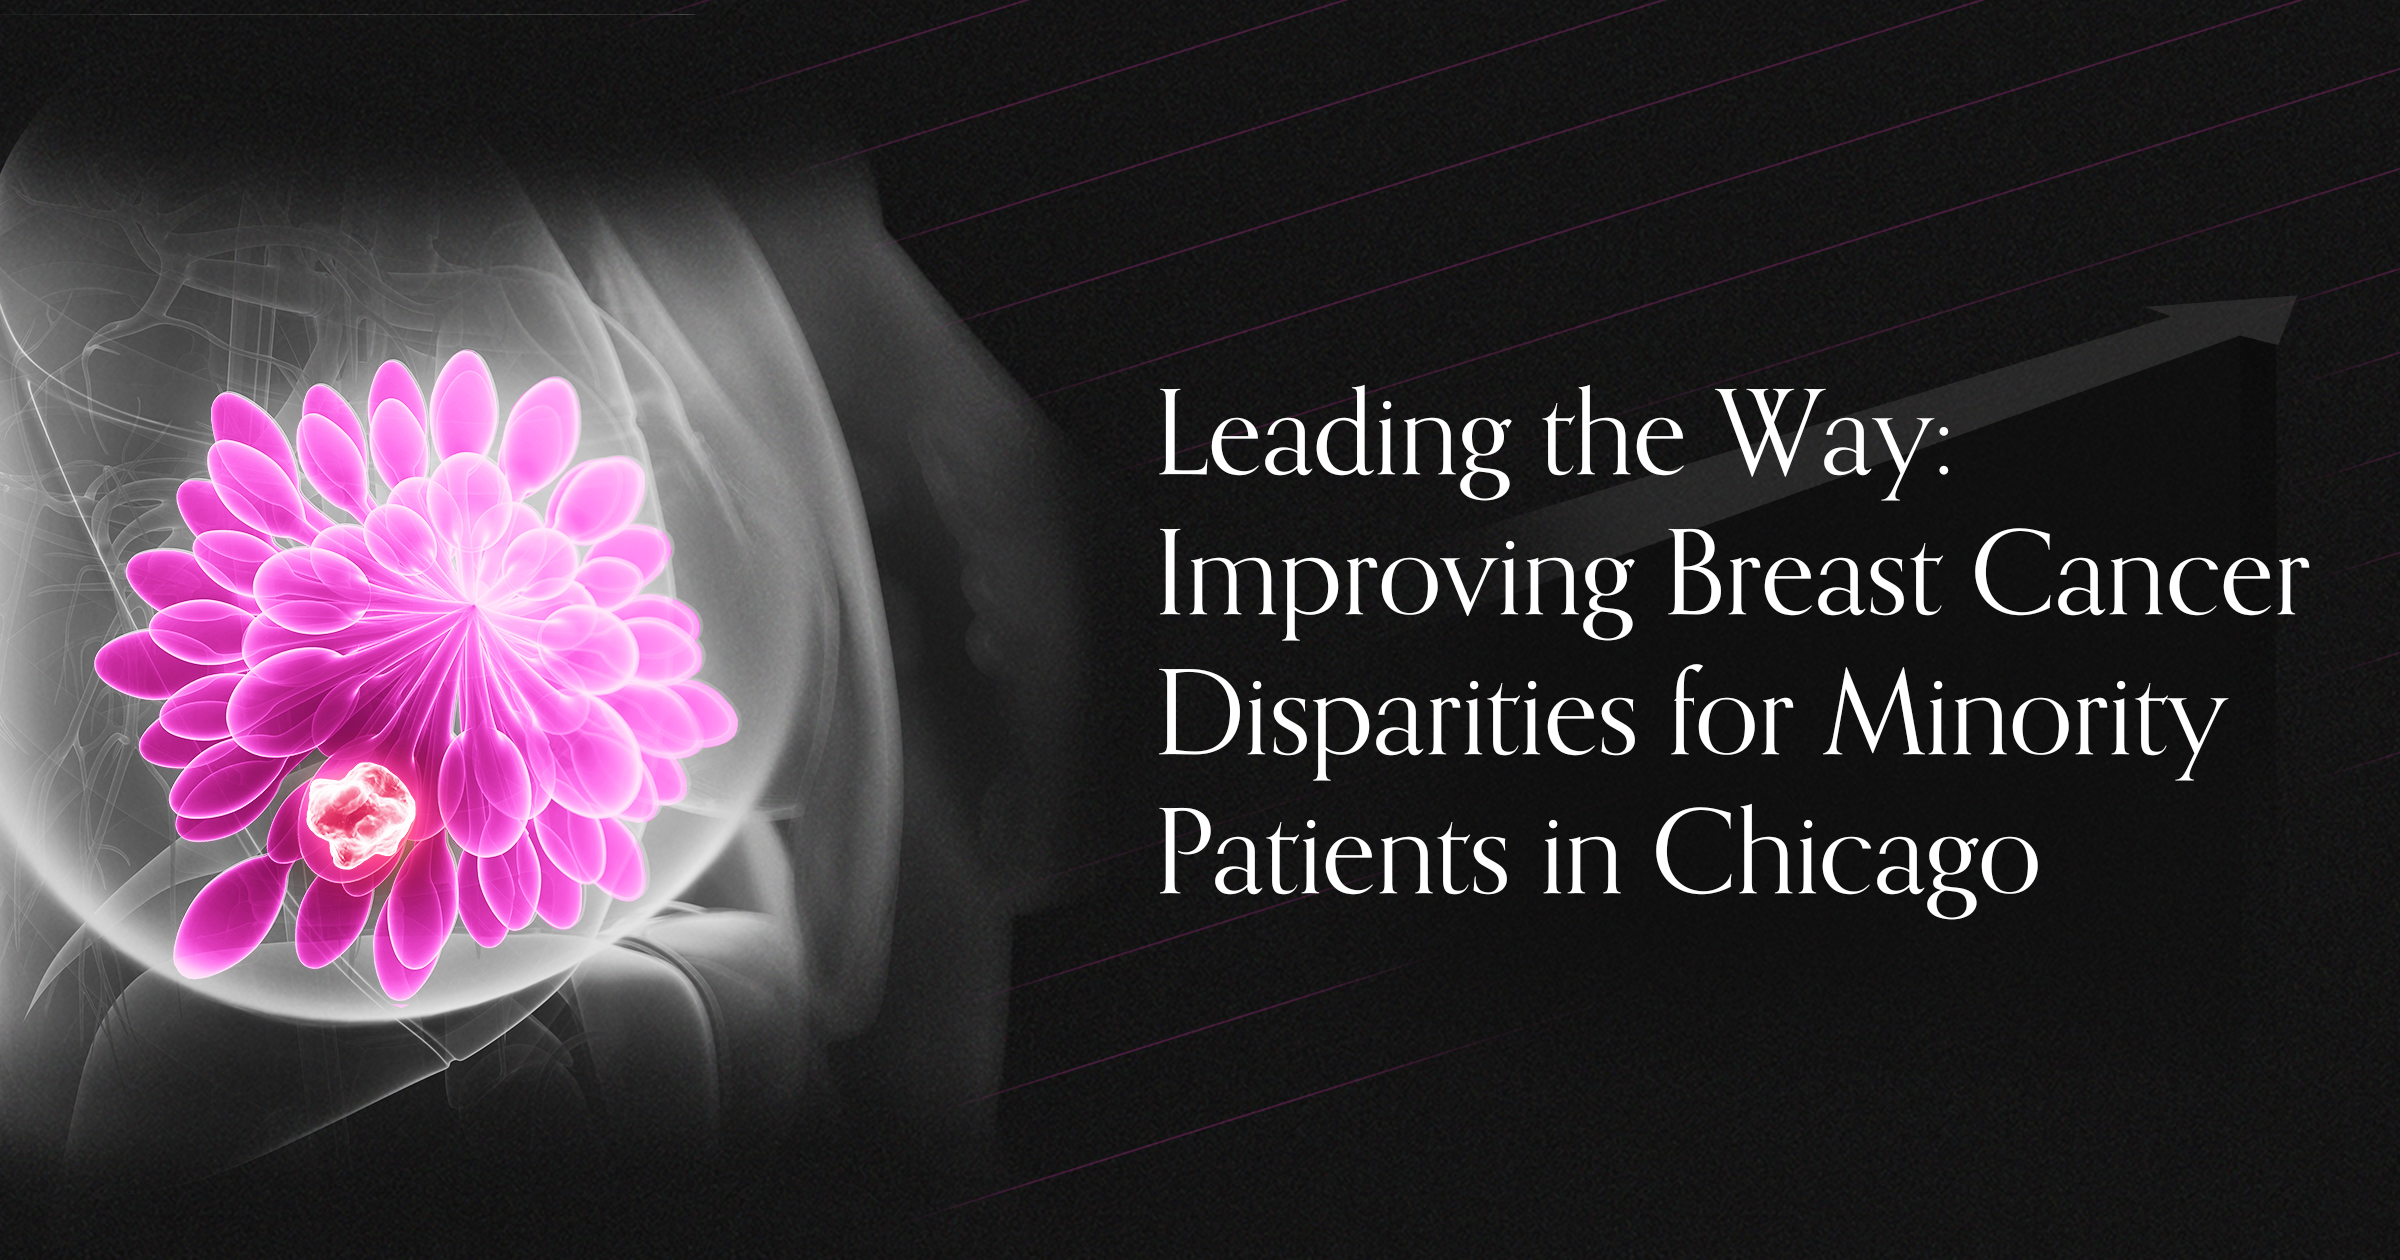 Chicago Leading the Way: New Educational Collaboration Seeks to Create a Clinical Action Plan to Eradicate Racial Disparity Gap in Breast Cancer